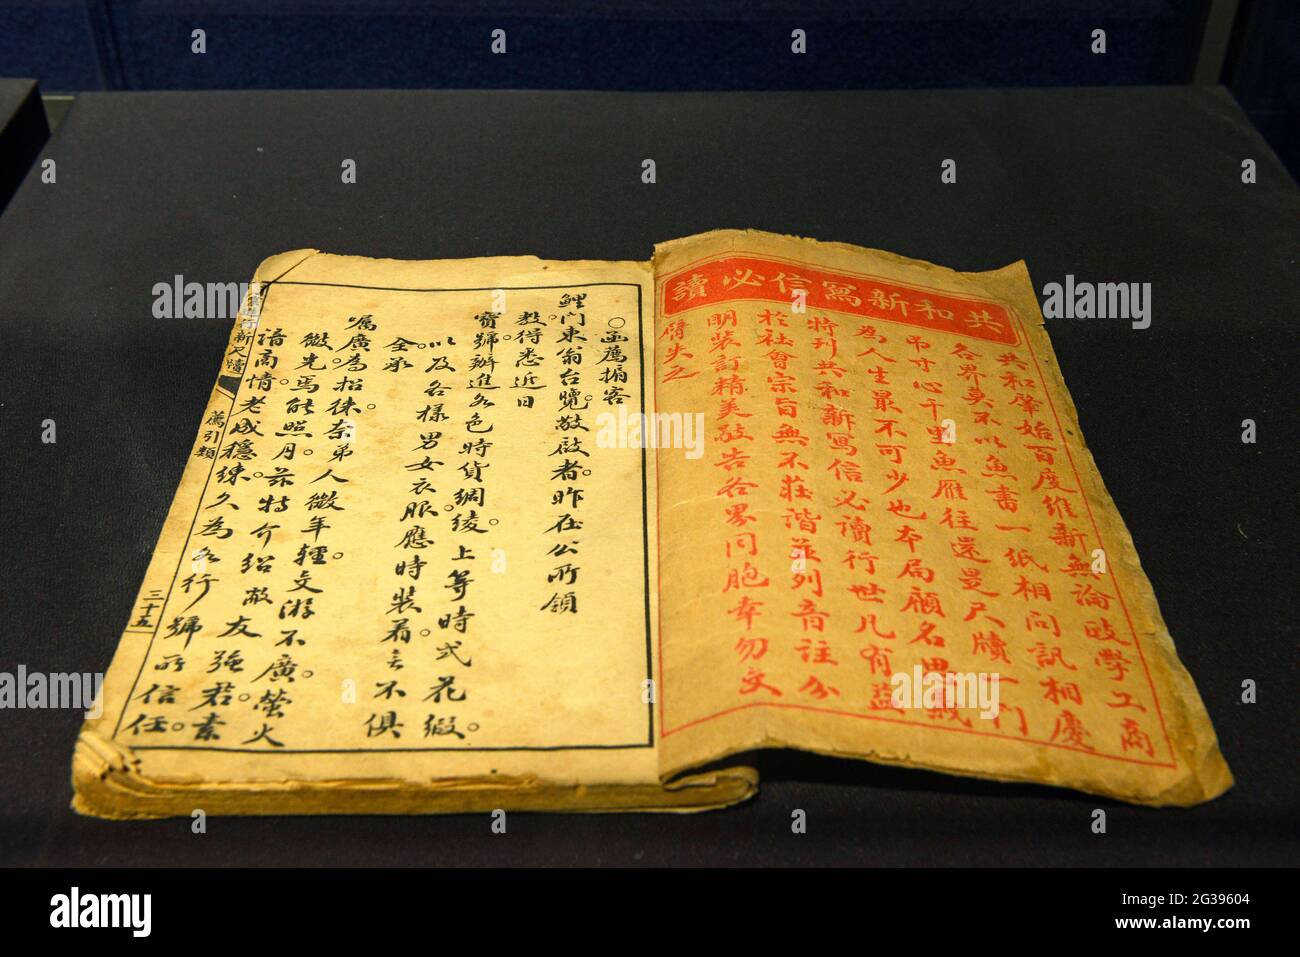 An open book displayed at the Qipao museum in an old house in Yantai, China Stock Photo